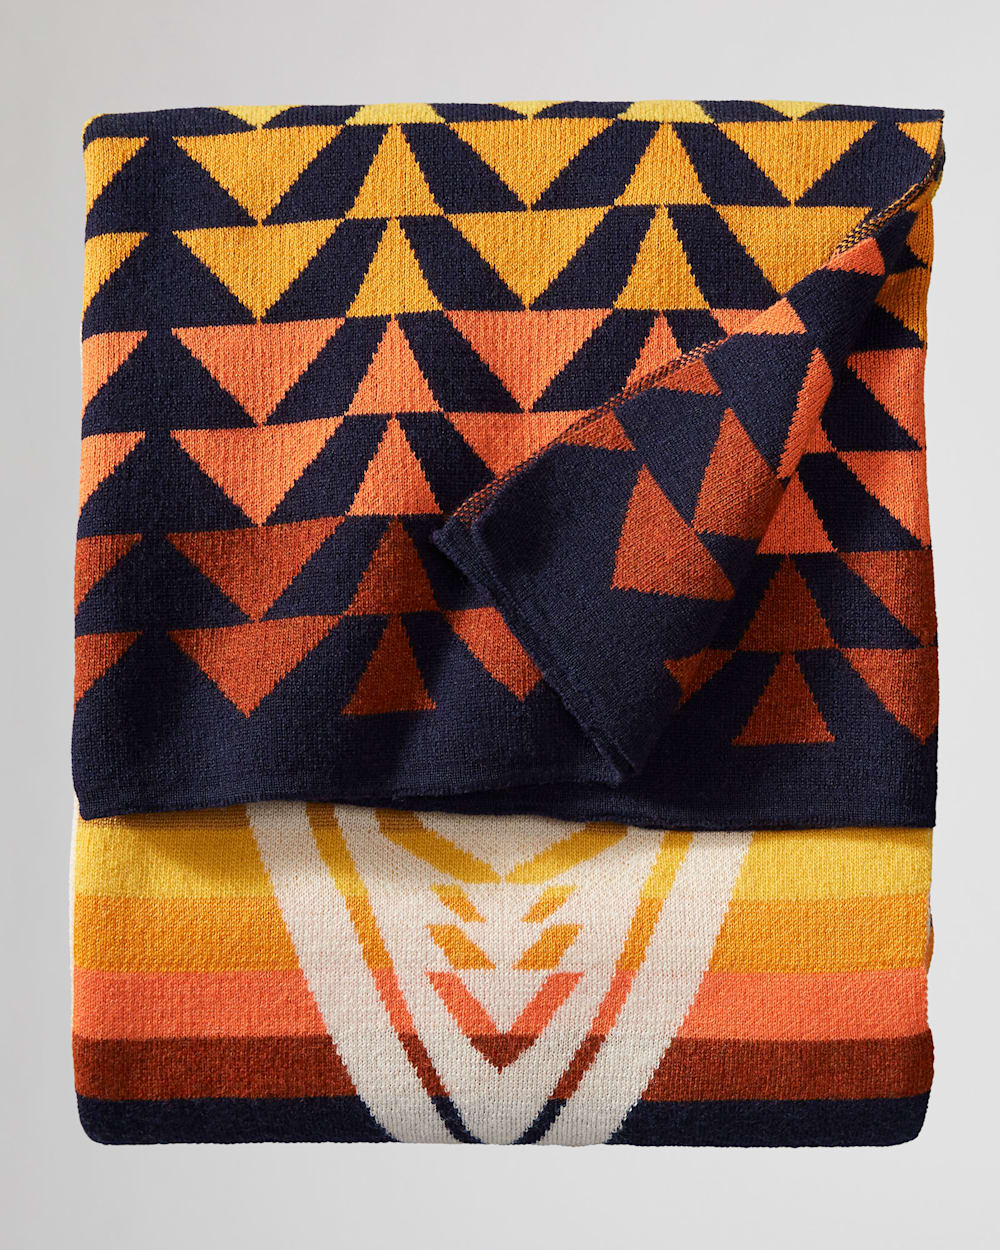 ALTERNATE VIEW OF HARDING KNIT THROW IN NAVY image number 3